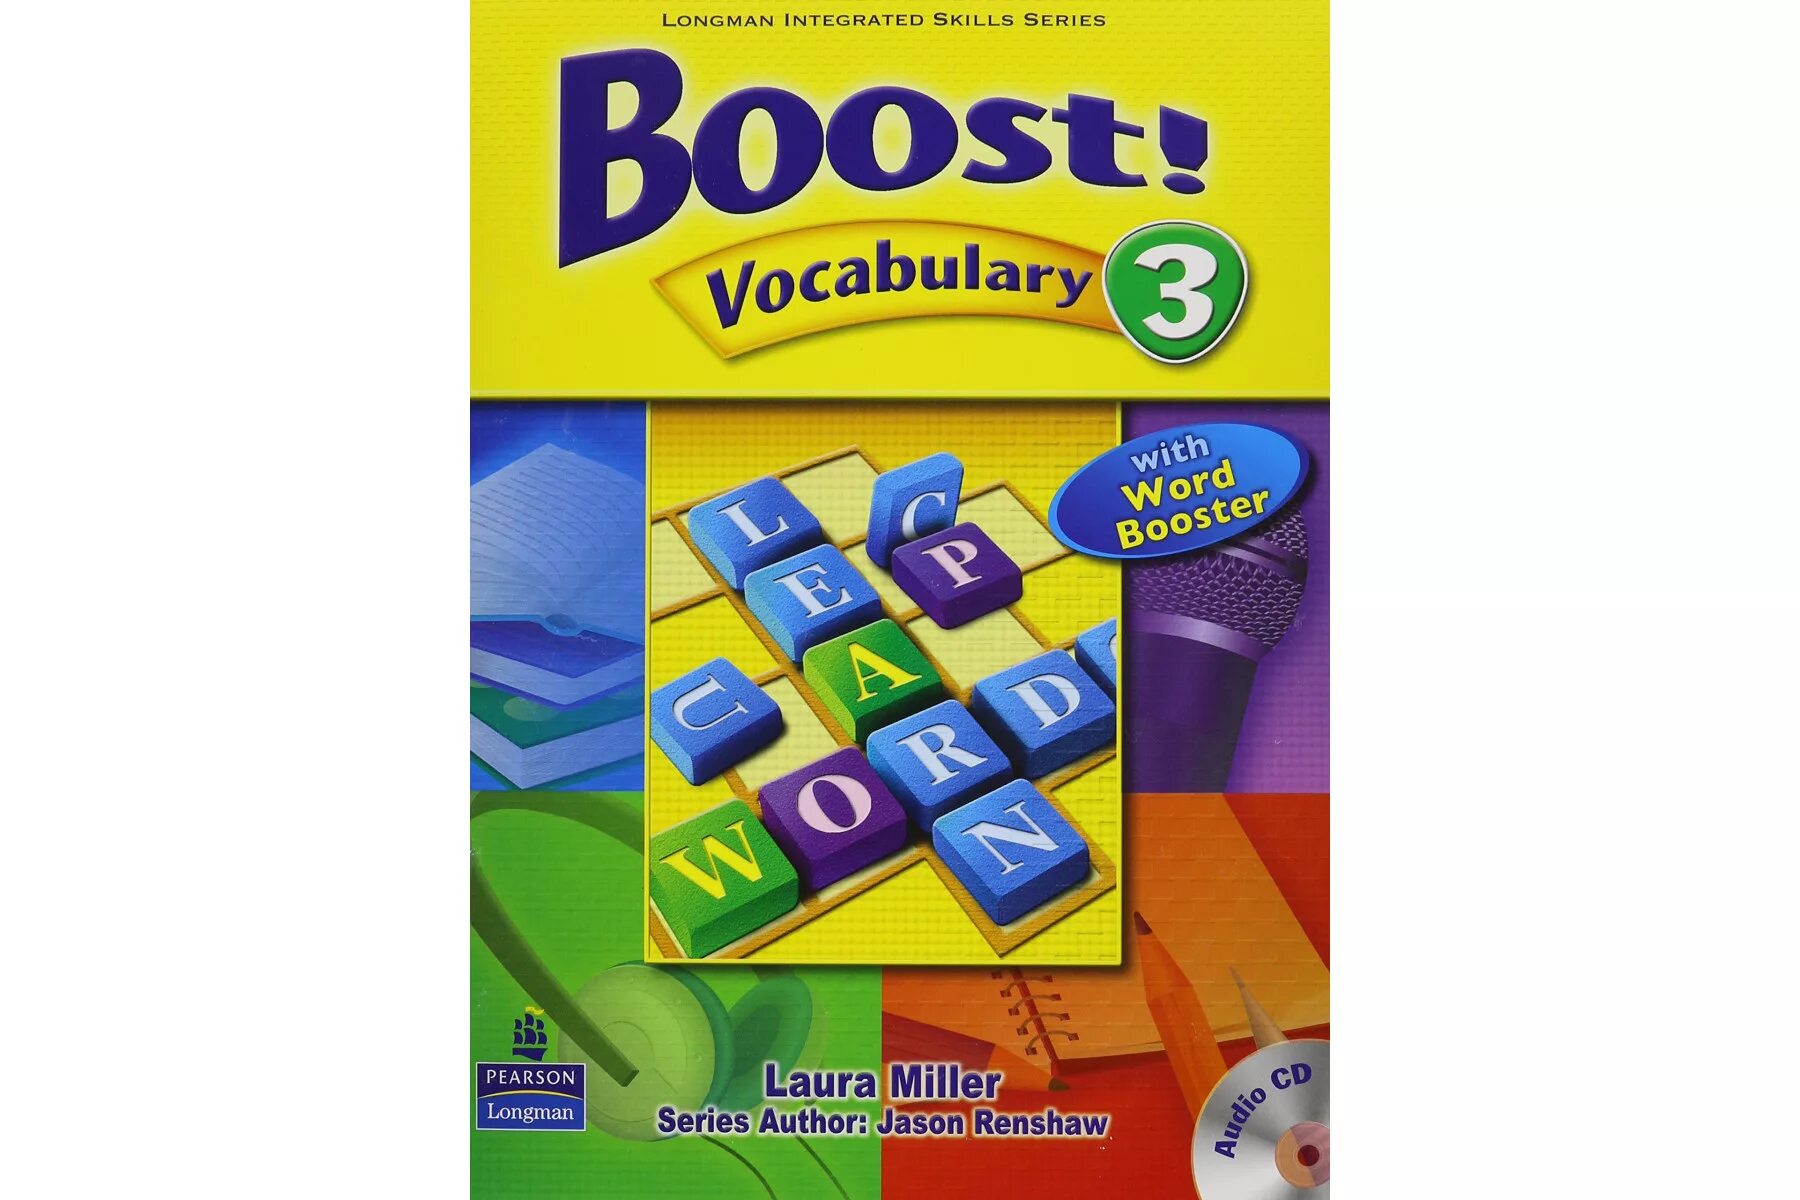 Boost Vocabulary. Boost your Vocabulary учебники. Vocab Boost. Skill Boost учебник.